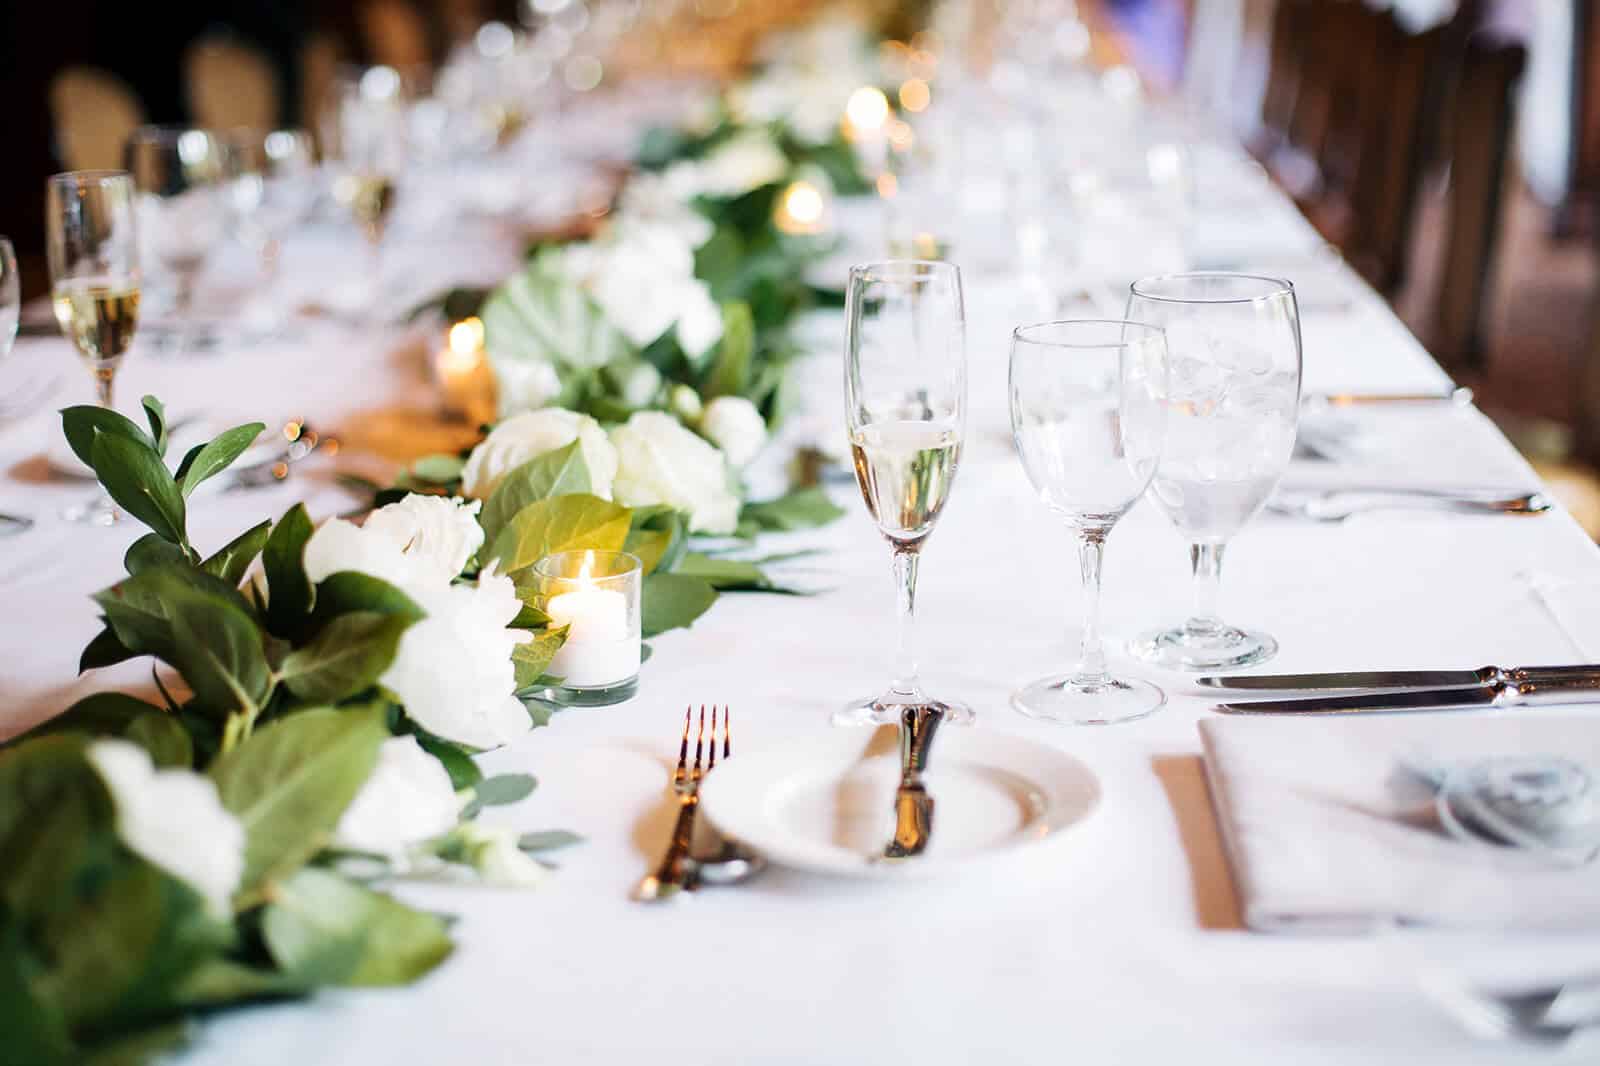 Table setting in event space